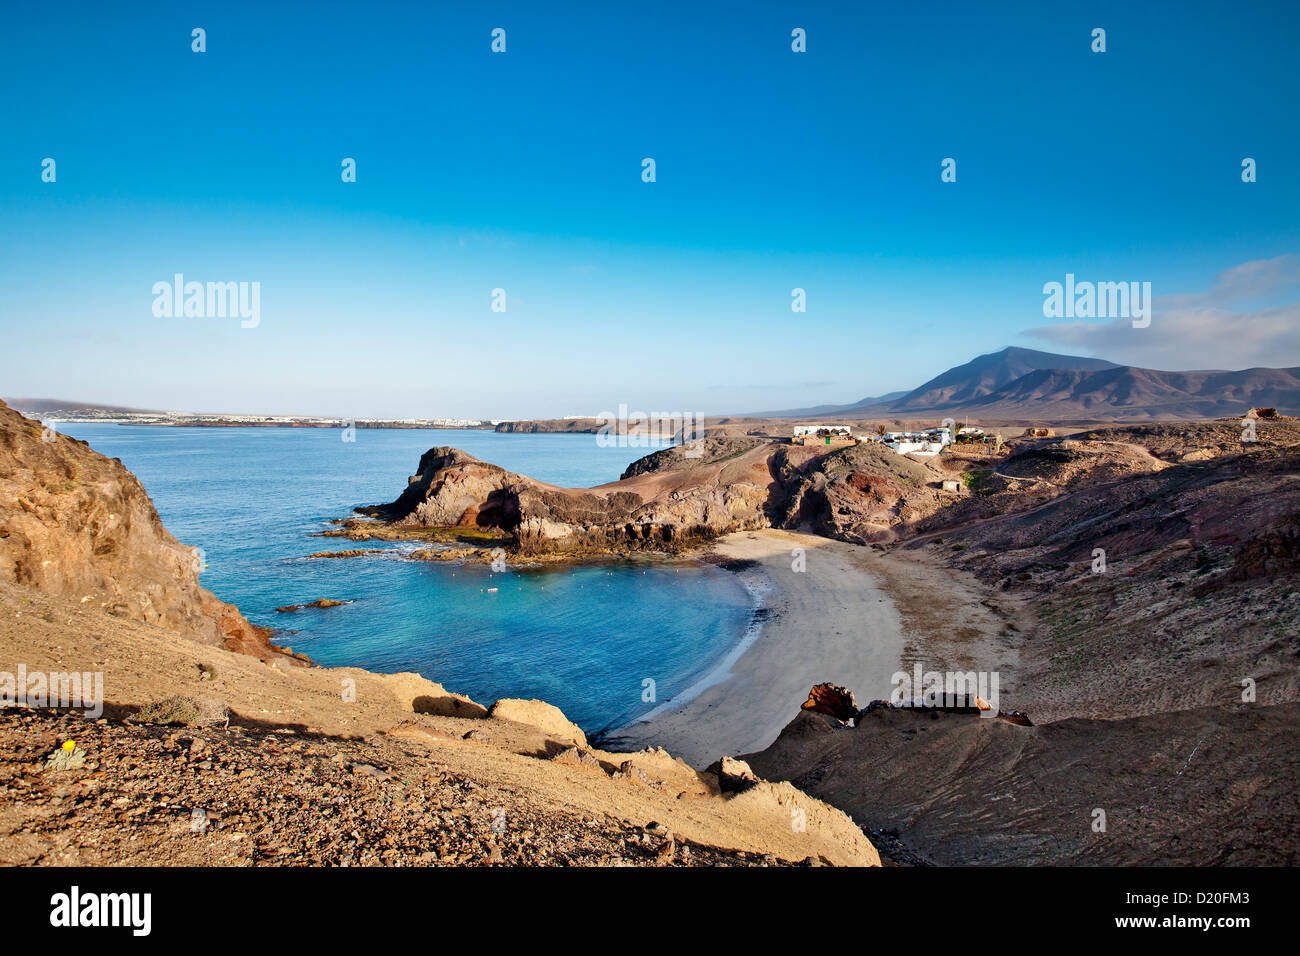 Playa Papagayo dans une baie, Lanzarote, Canary Islands, Spain, Europe Banque D'Images